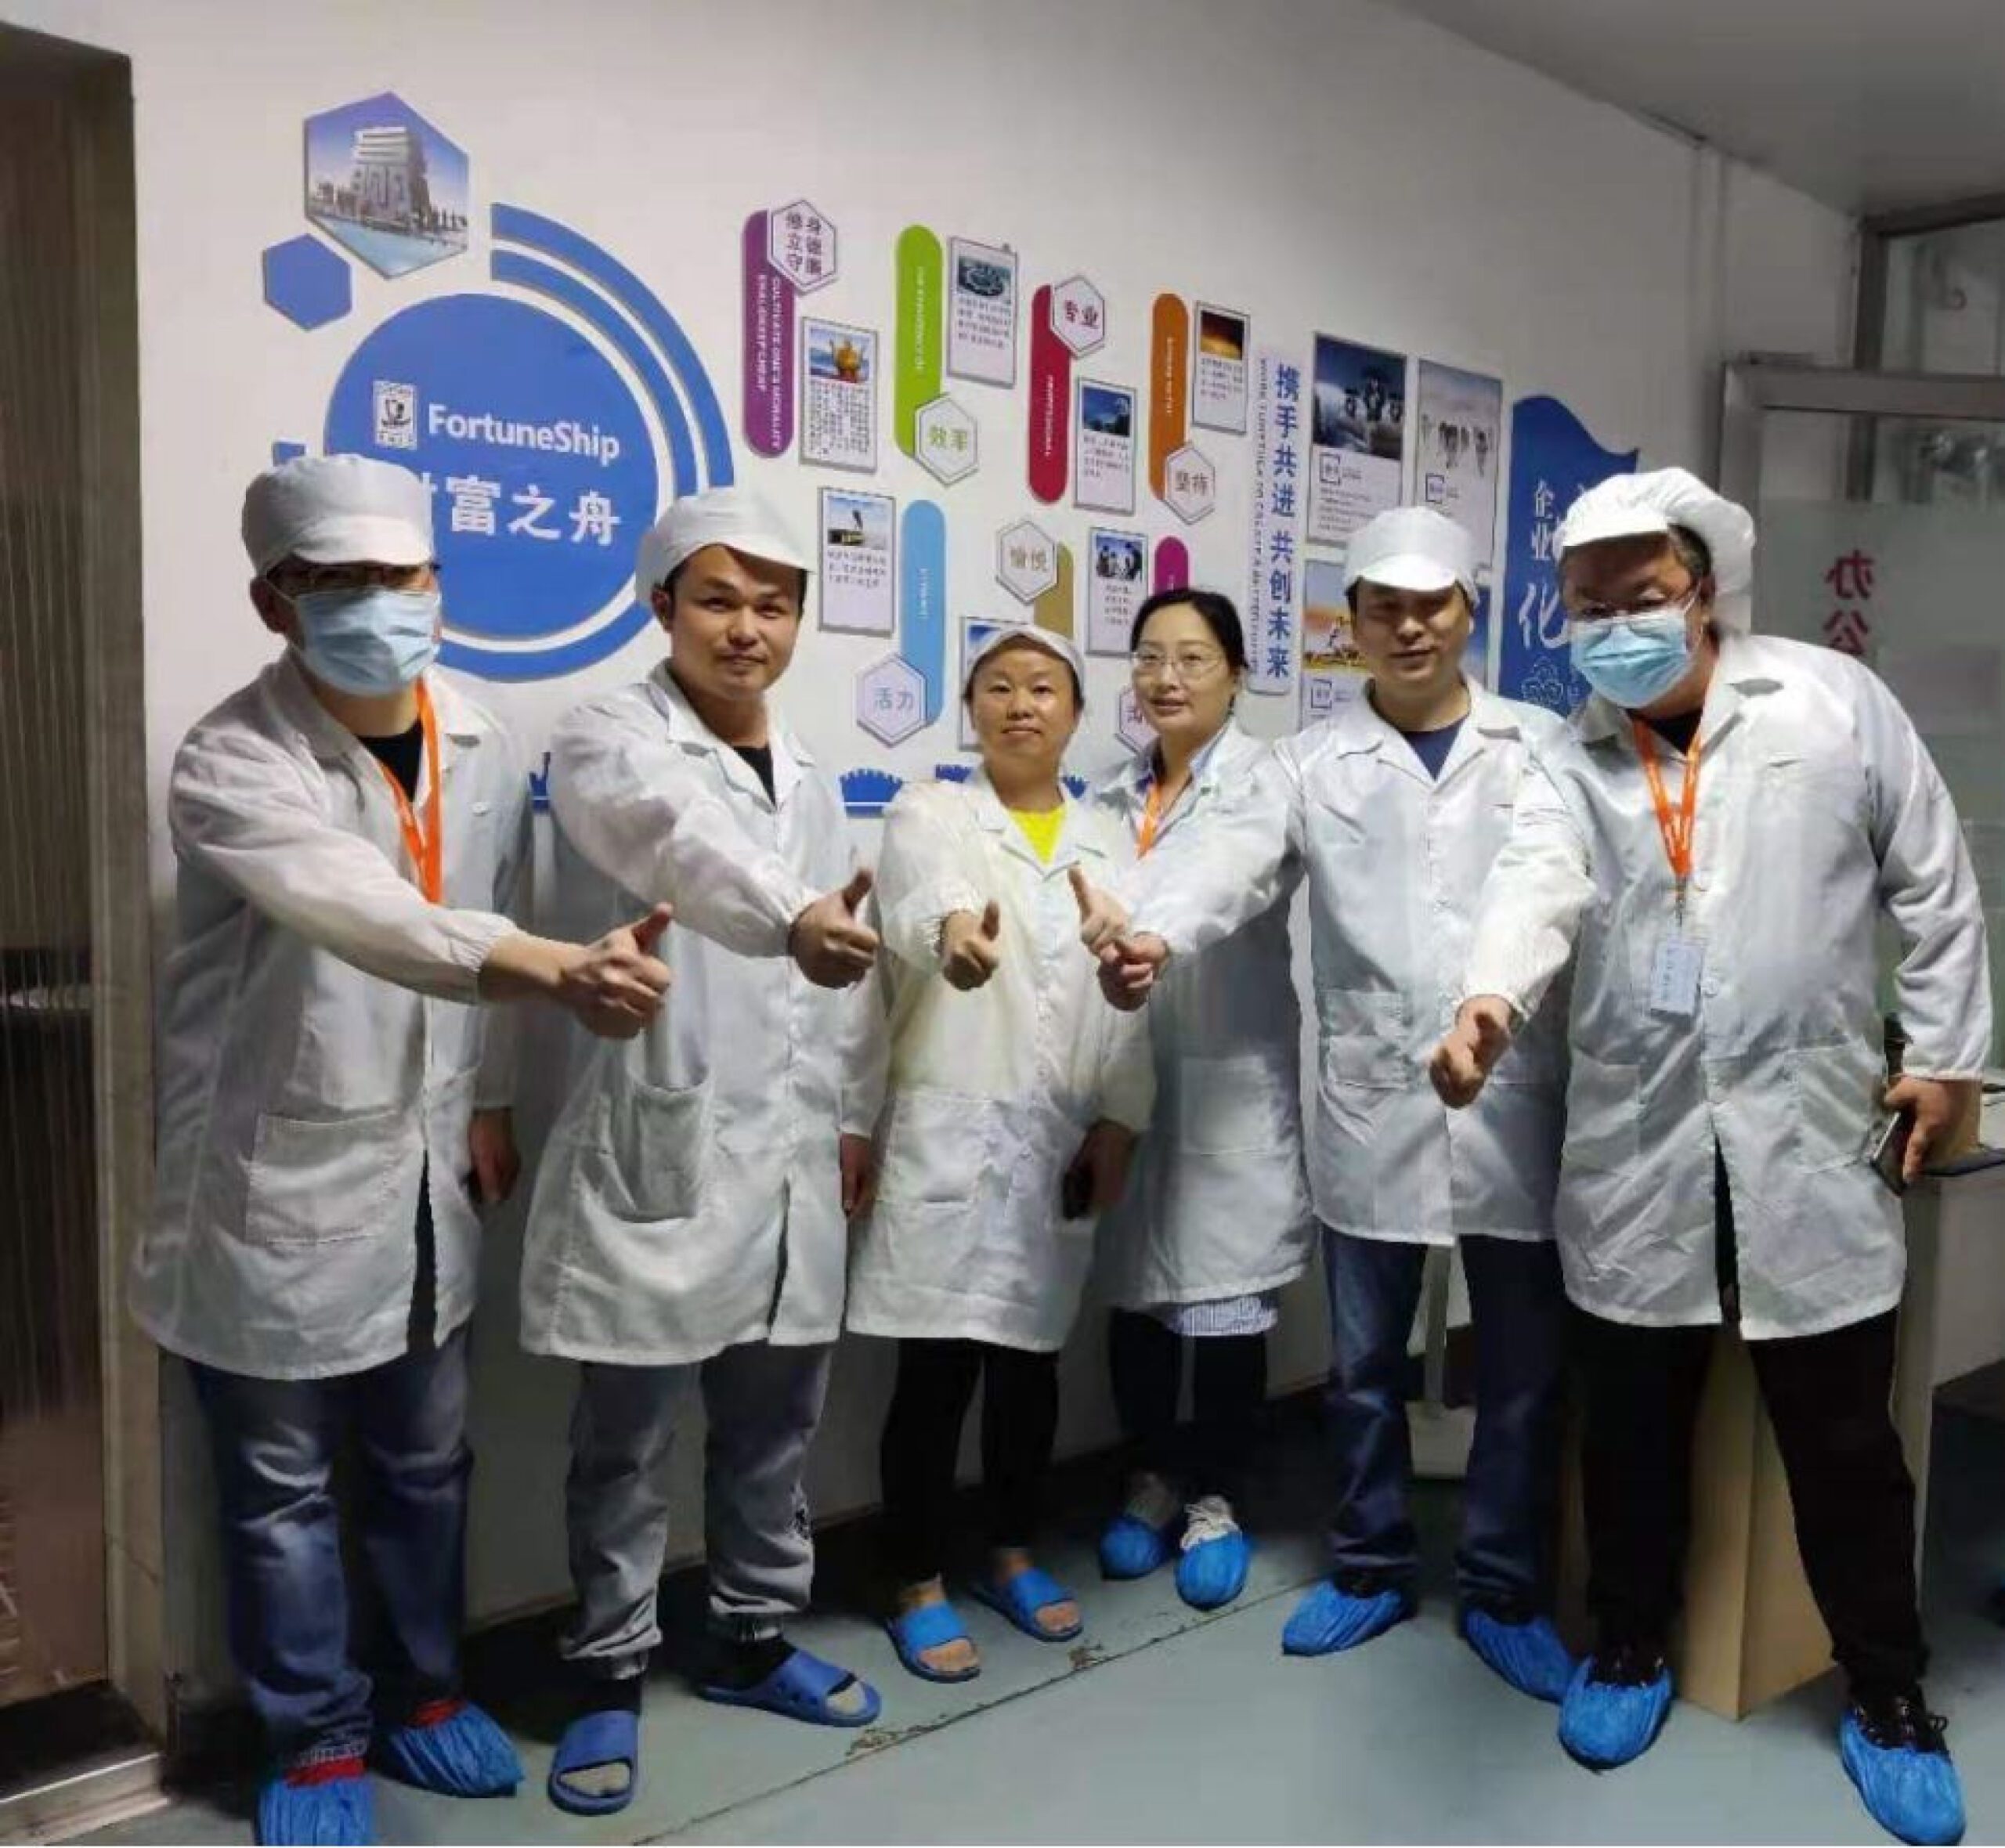 Our factory team posing in white lab coats and giving thumbs ups